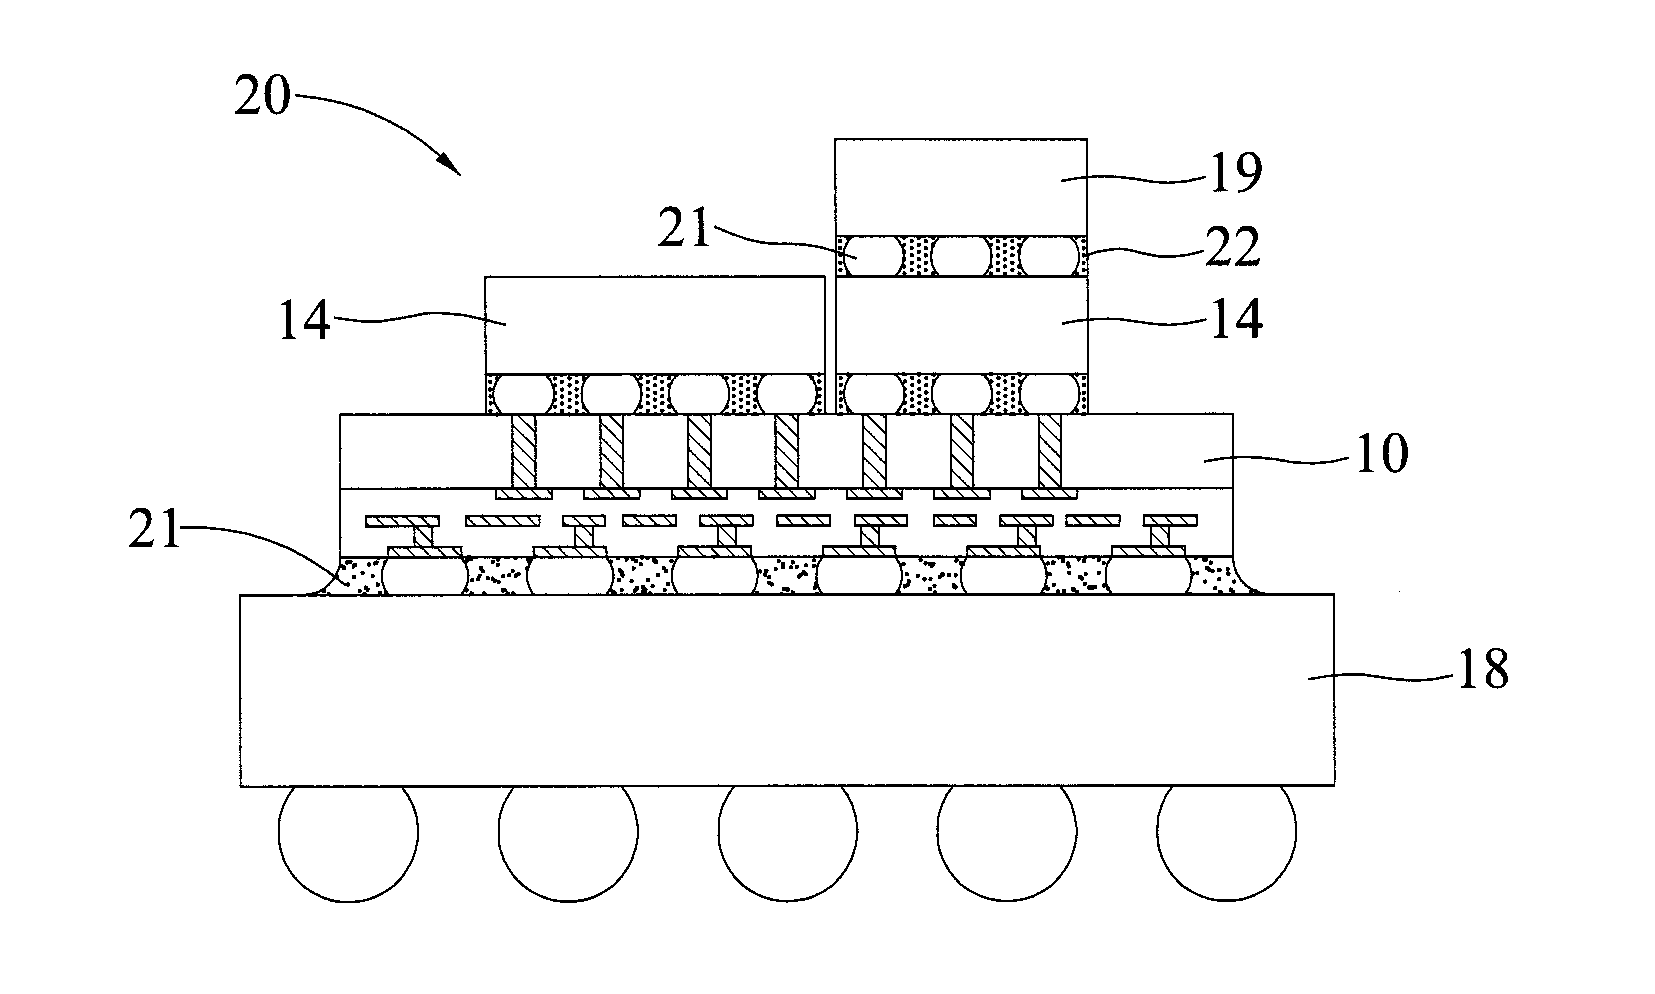 Method of fabricating a semiconductor package